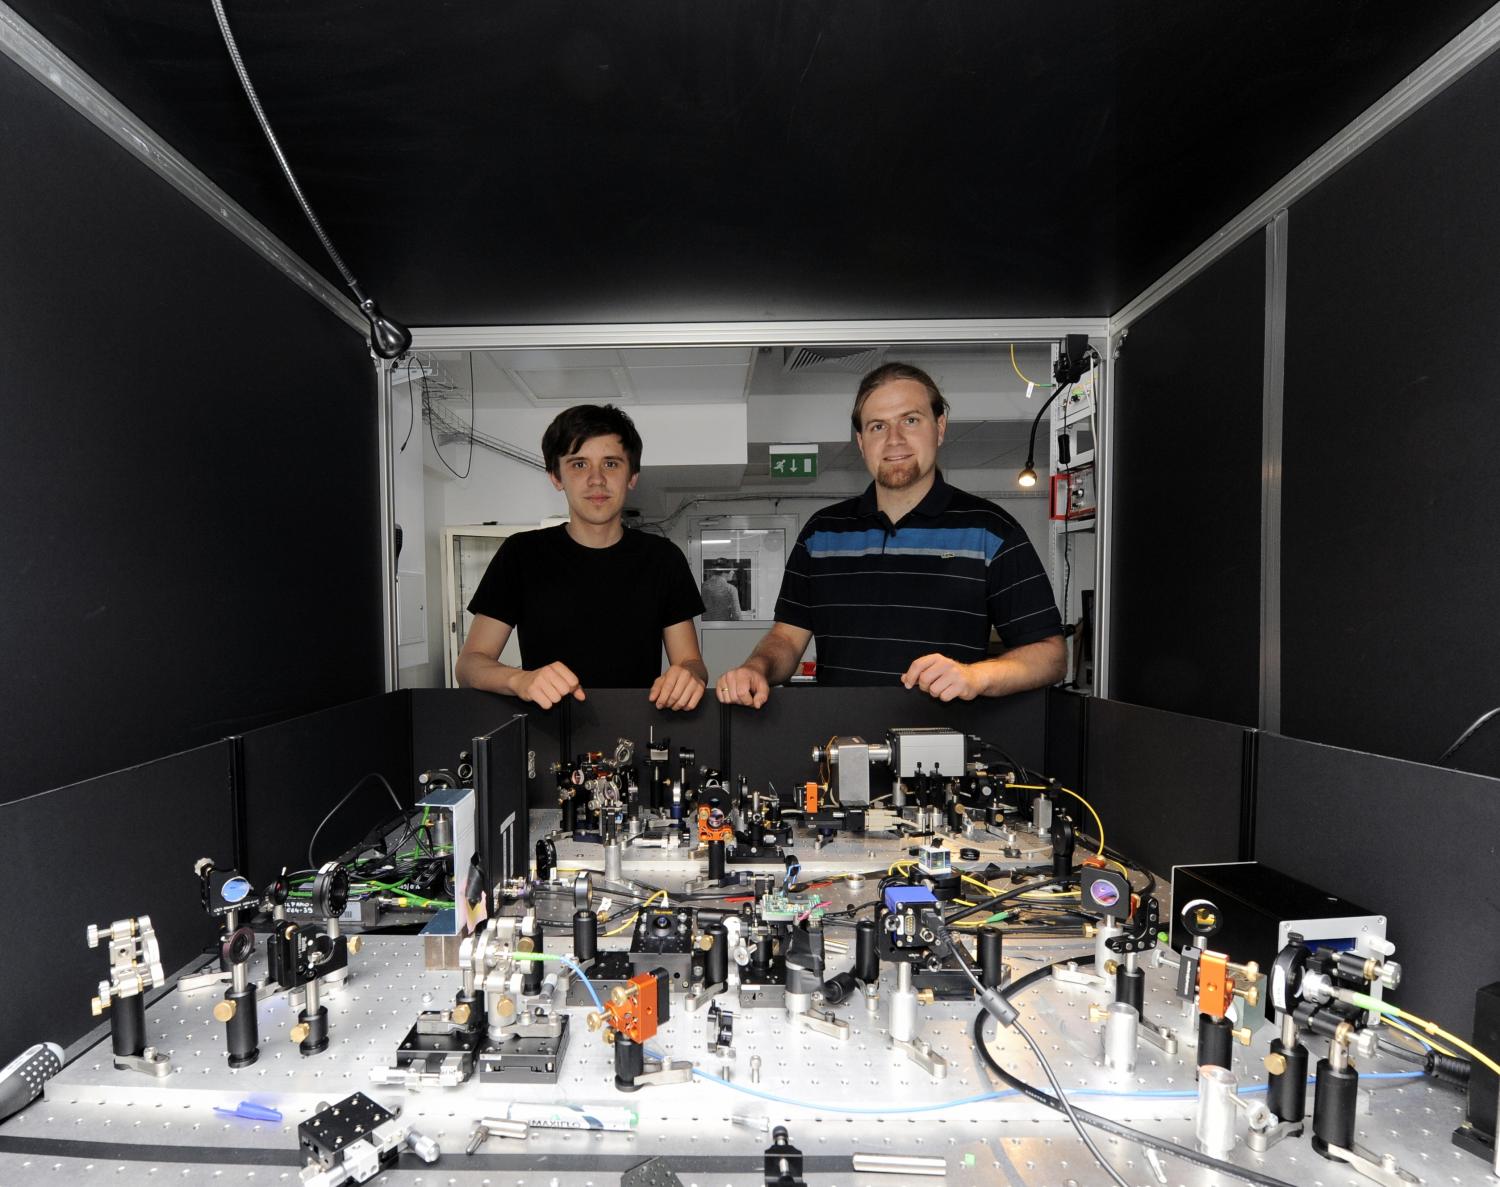 Physicists stored data in quantum holograms made of twisted light